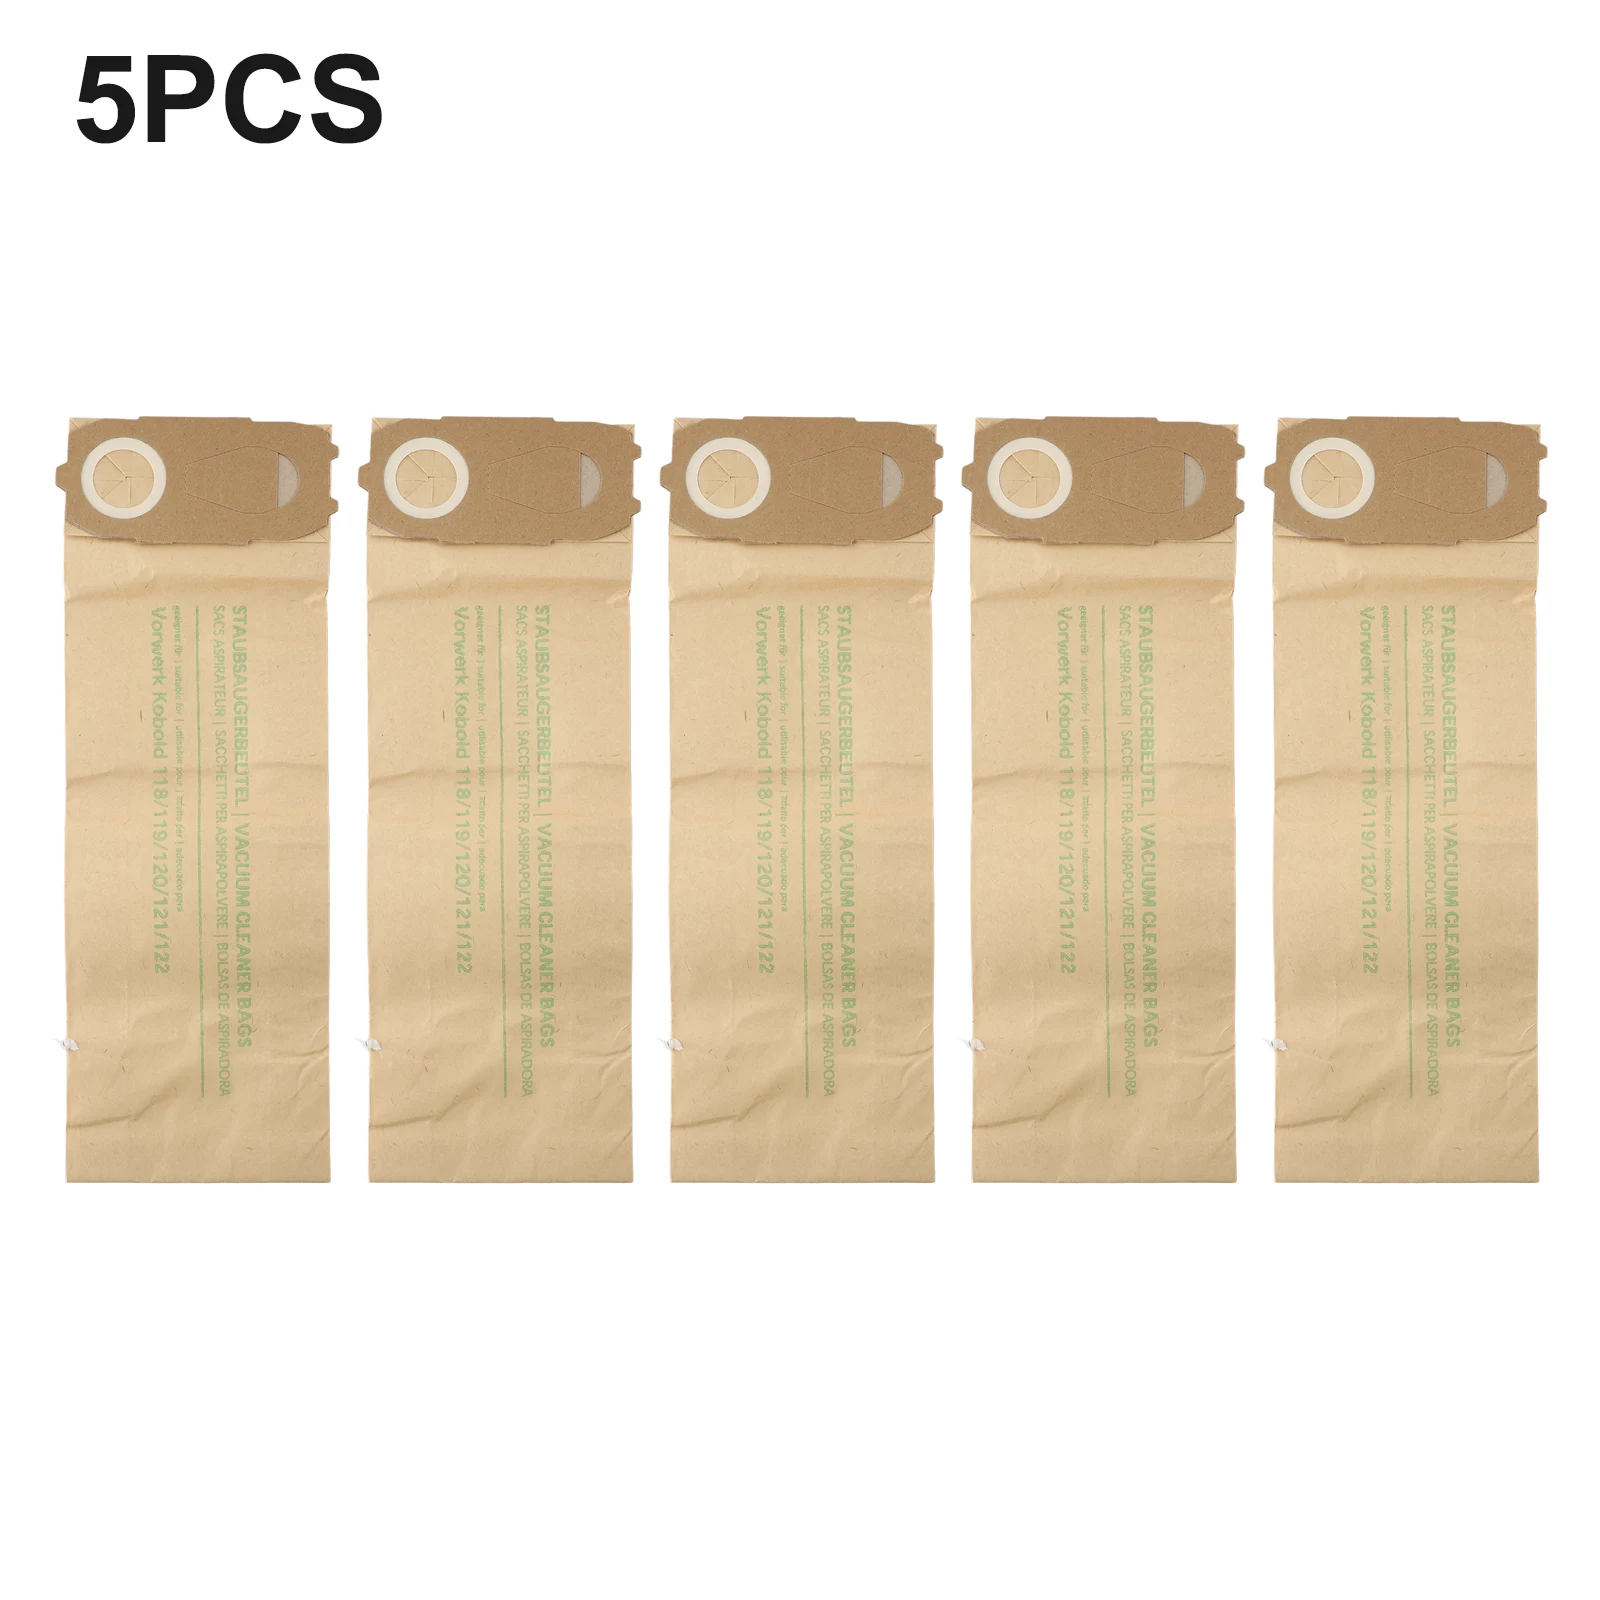 

5 Pcs Dust Bags Set For-VK 118 119 120 121 122 Vacuum Cleaner Bags Household Cleaning Parts Replacement Tools